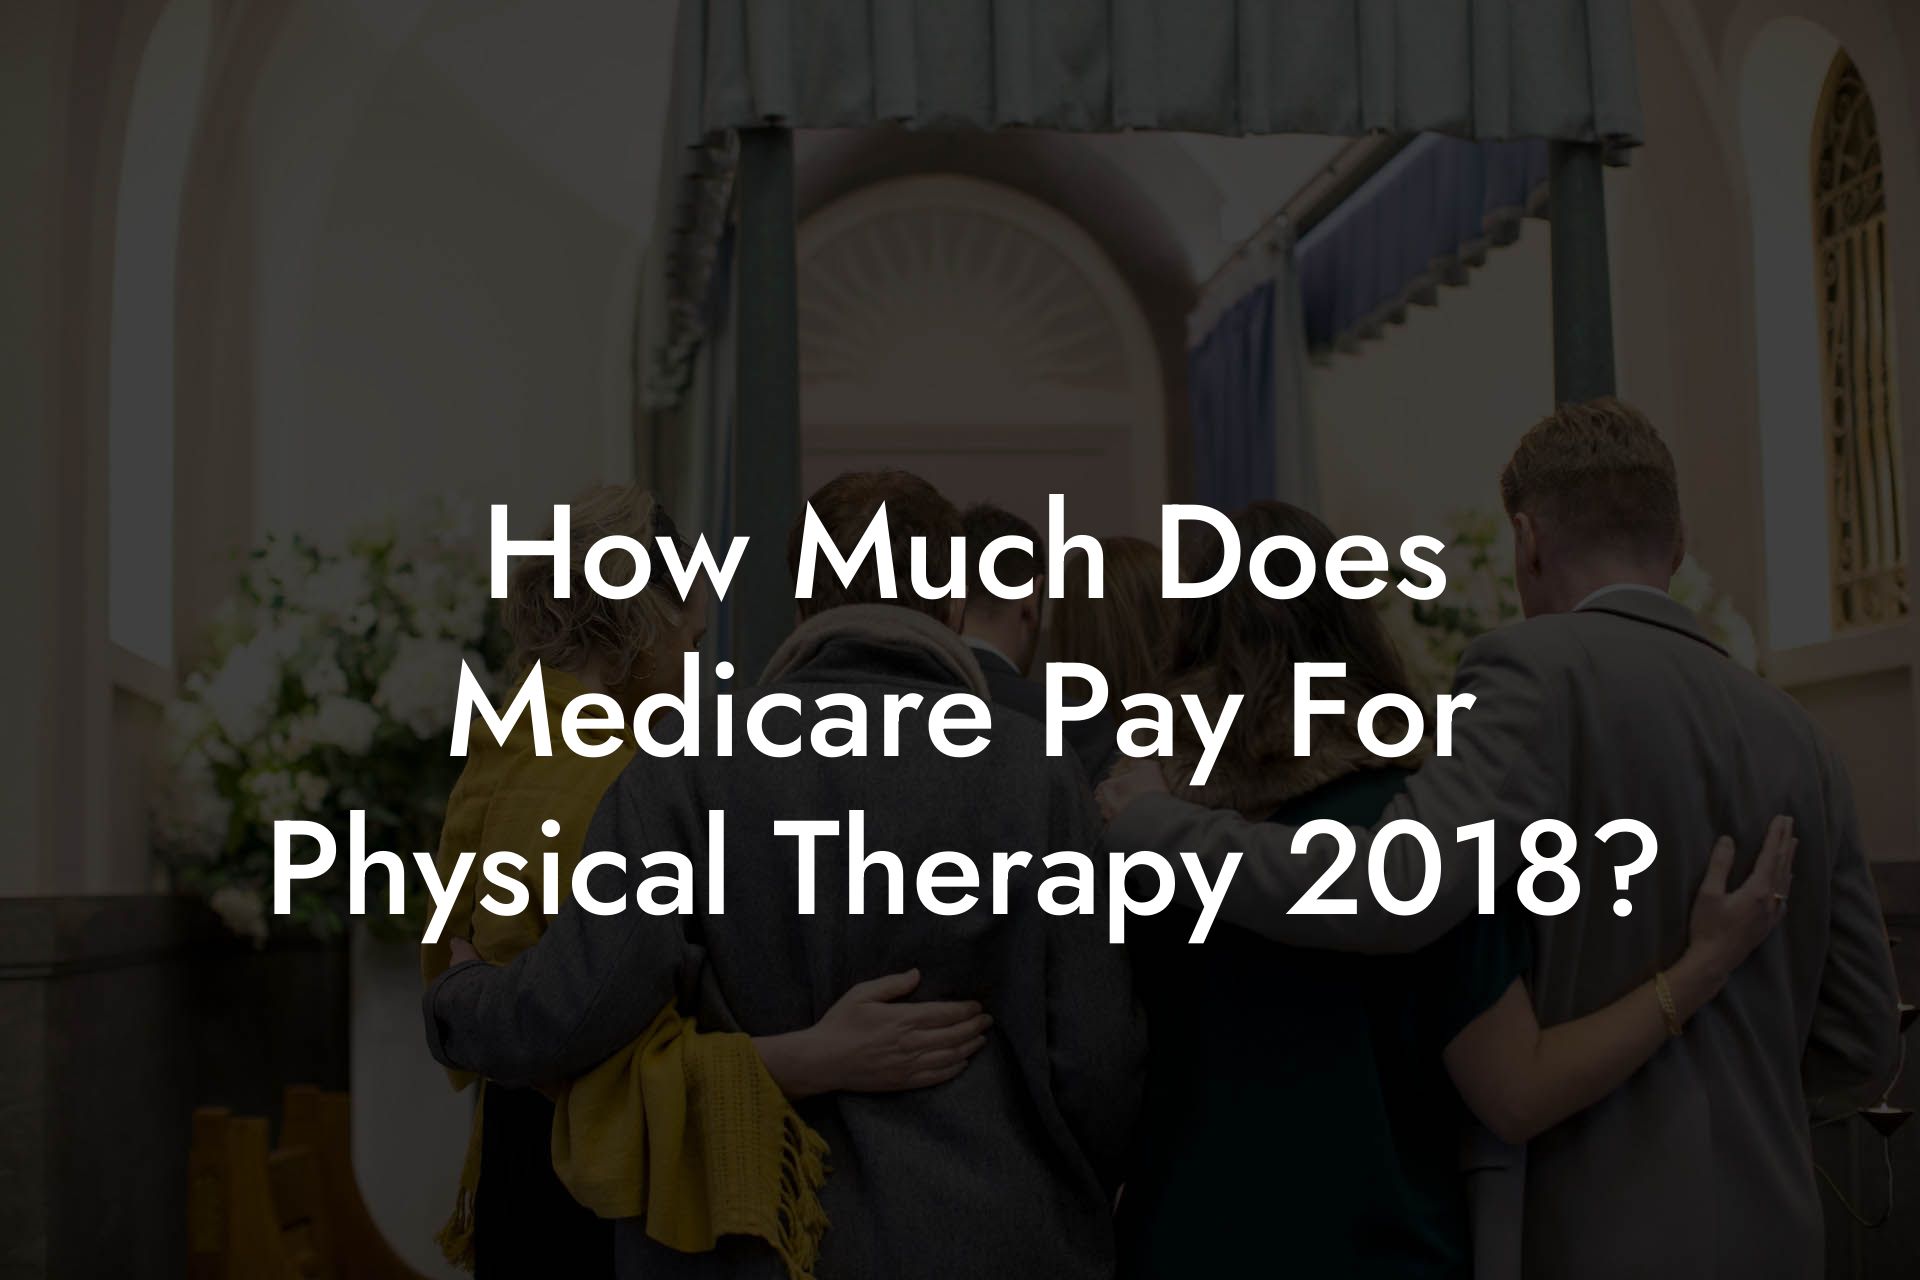 How Much Does Medicare Pay For Physical Therapy 2018?